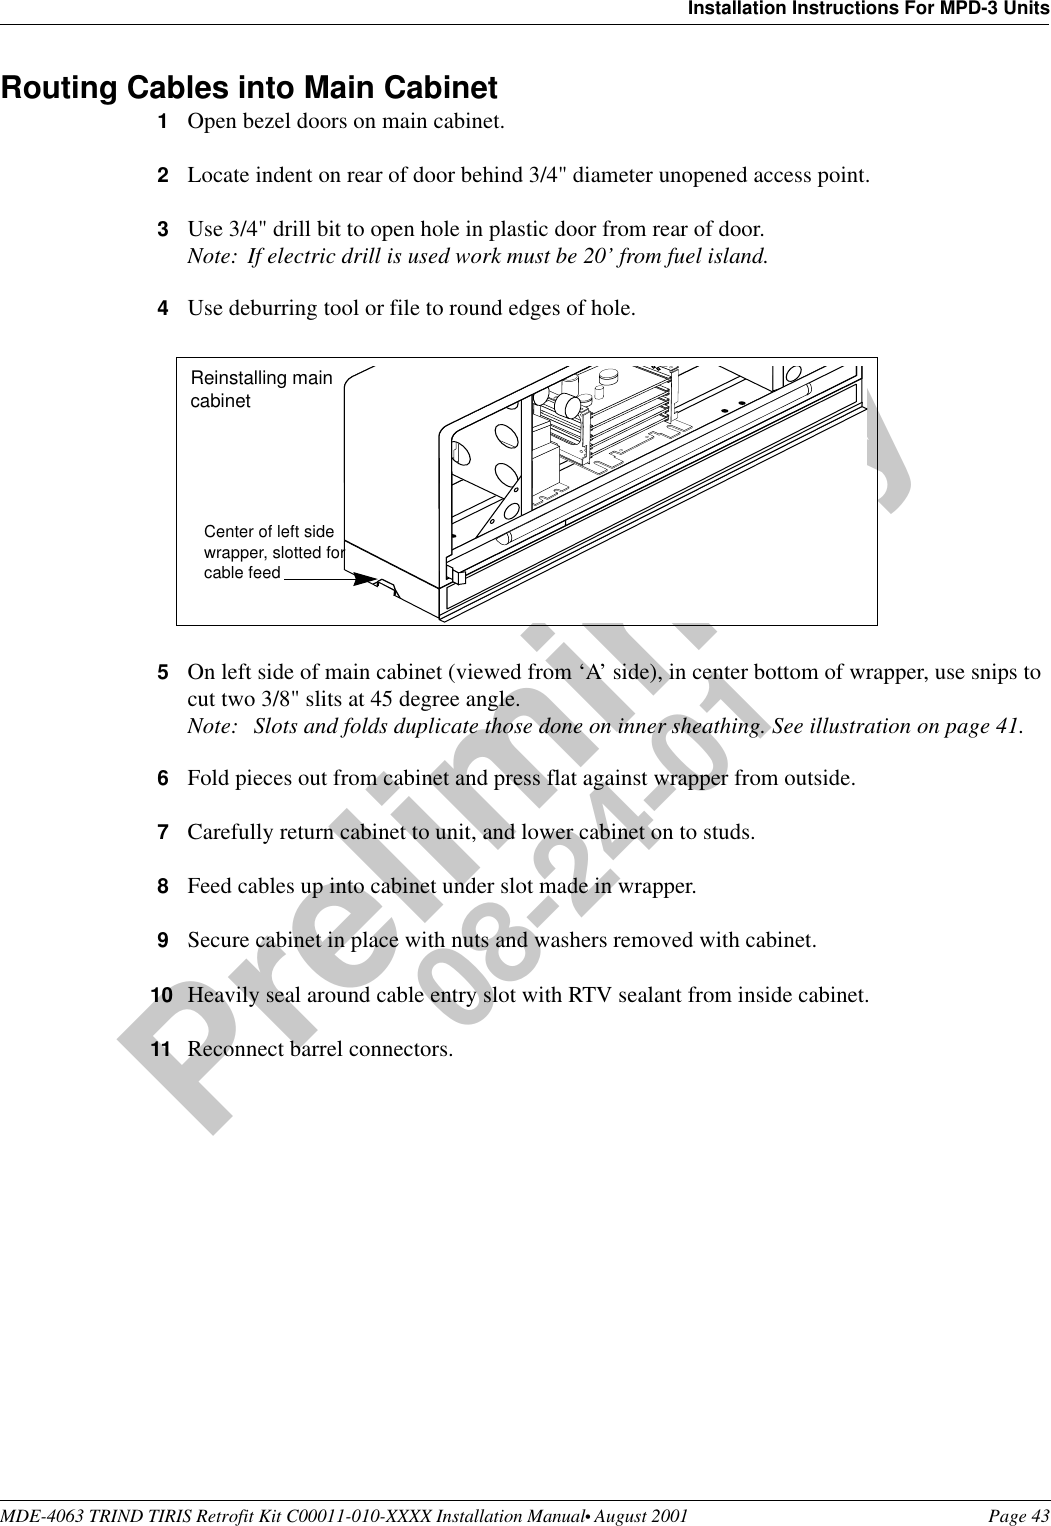 MDE-4063 TRIND TIRIS Retrofit Kit C00011-010-XXXX Installation Manual• August 2001 Page 43Installation Instructions For MPD-3 UnitsPreliminary08-24-01Routing Cables into Main Cabinet1Open bezel doors on main cabinet.2Locate indent on rear of door behind 3/4&quot; diameter unopened access point.3Use 3/4&quot; drill bit to open hole in plastic door from rear of door.Note: If electric drill is used work must be 20’ from fuel island.4Use deburring tool or file to round edges of hole.5On left side of main cabinet (viewed from ‘A’ side), in center bottom of wrapper, use snips to cut two 3/8&quot; slits at 45 degree angle.Note:  Slots and folds duplicate those done on inner sheathing. See illustration on page 41.6Fold pieces out from cabinet and press flat against wrapper from outside.7Carefully return cabinet to unit, and lower cabinet on to studs.8Feed cables up into cabinet under slot made in wrapper.9Secure cabinet in place with nuts and washers removed with cabinet.10 Heavily seal around cable entry slot with RTV sealant from inside cabinet.11 Reconnect barrel connectors.Center of left side wrapper, slotted for cable feedReinstalling main cabinet